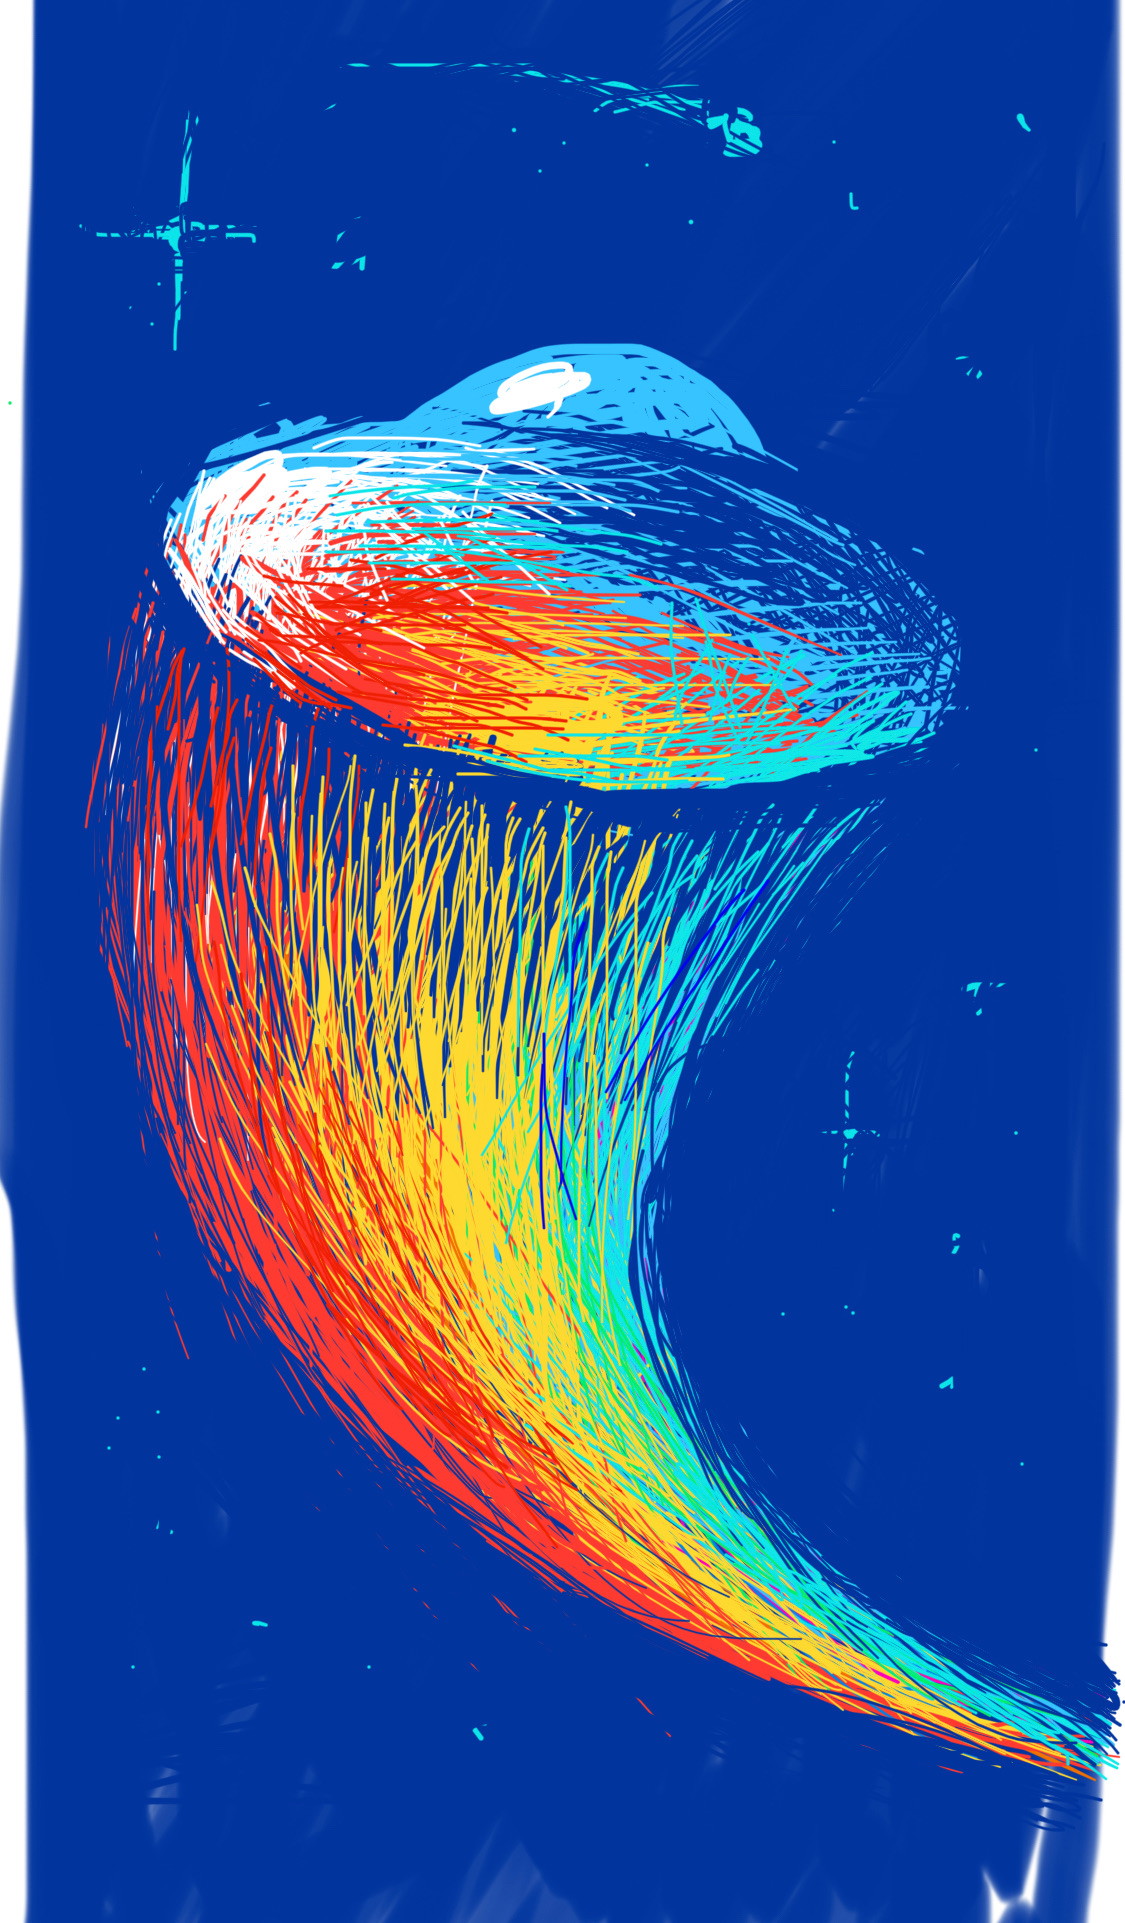 A UFO in space with rainbow colors streaming behind it